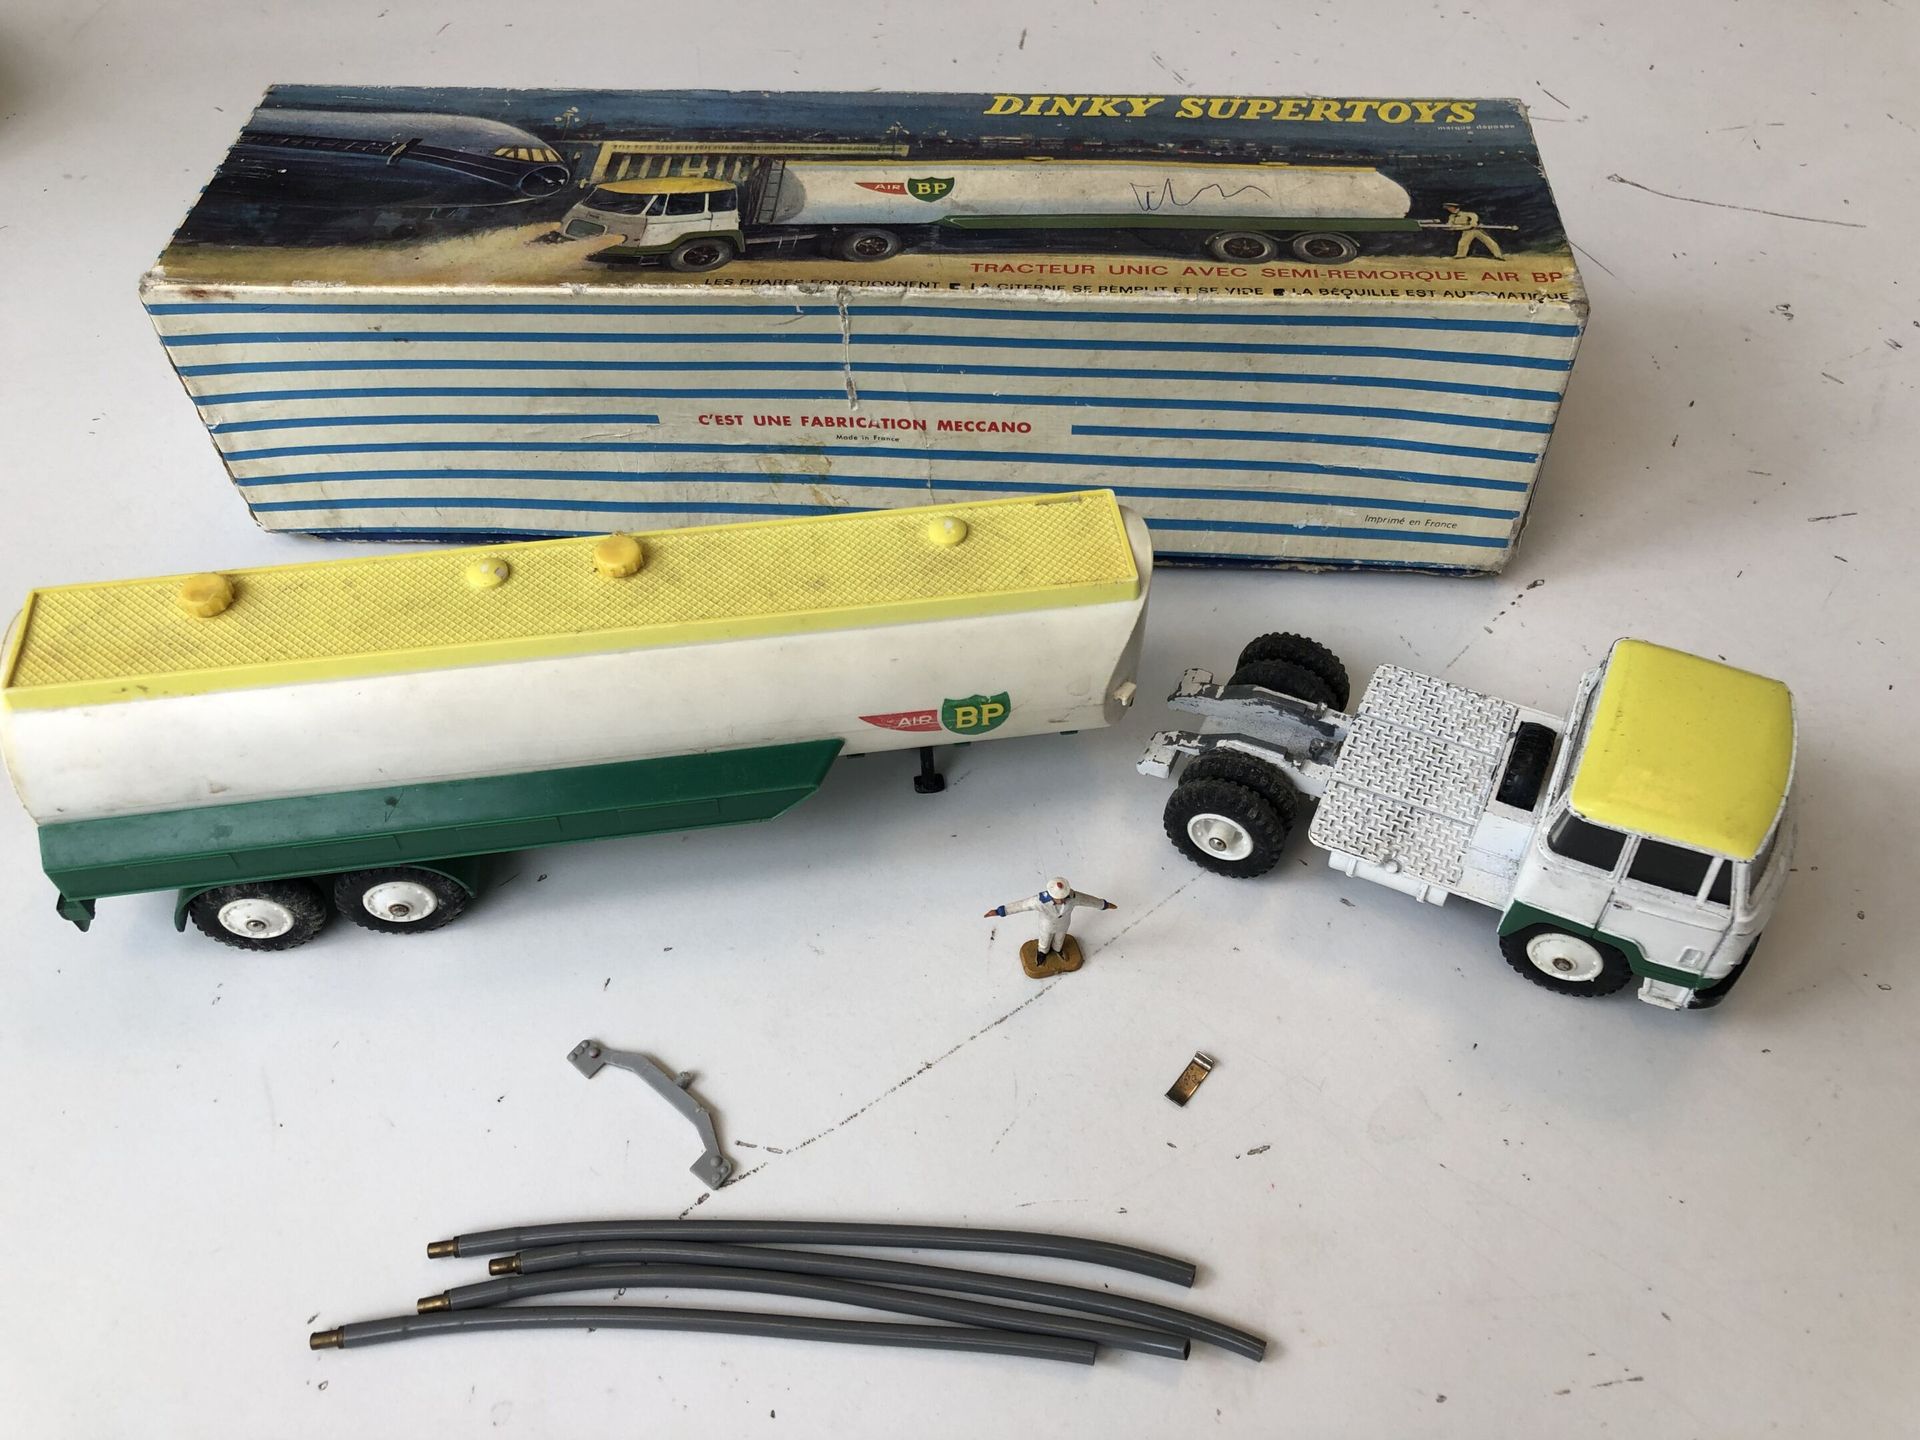 DINKY SUPERTOYS Unic tractor with Air BP trailer.

Ref 887.

Original box.

Acci&hellip;